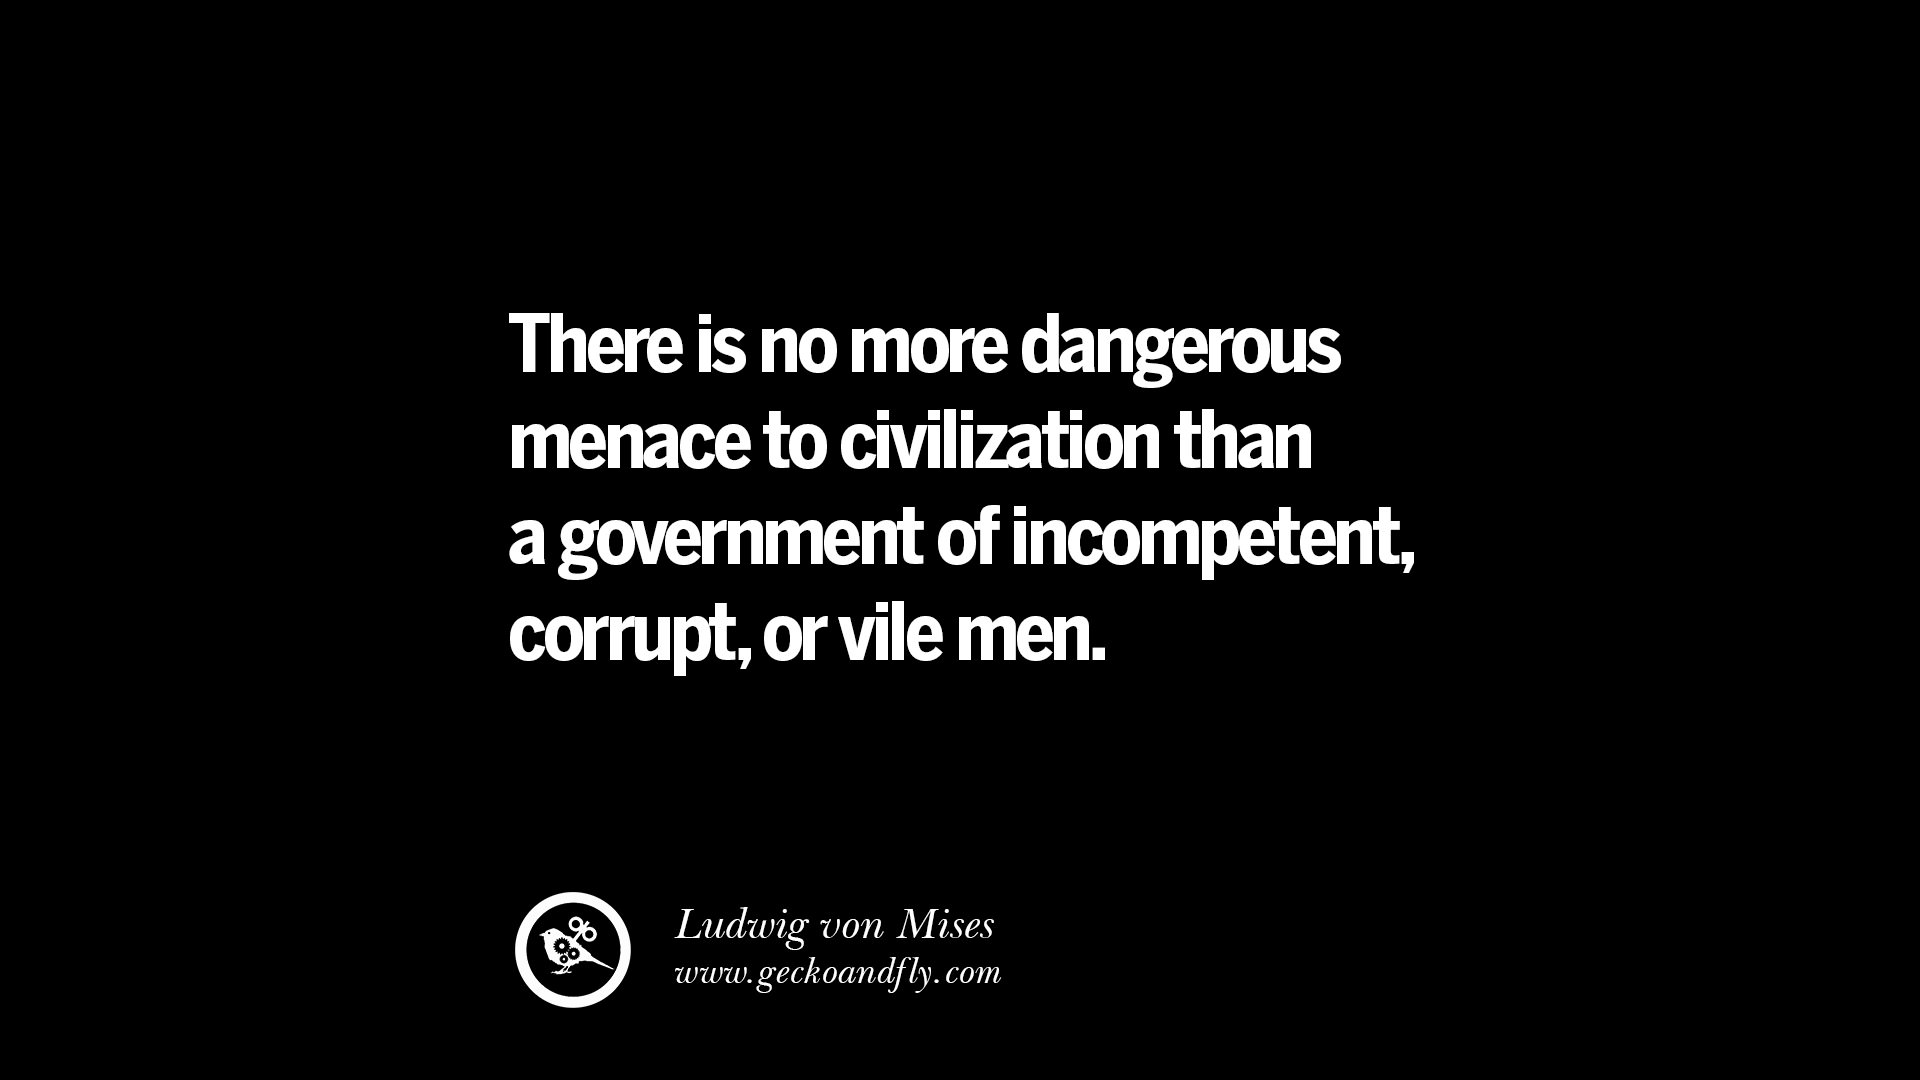 42 Anti Corruption Quotes For Politicians On Greed And Power